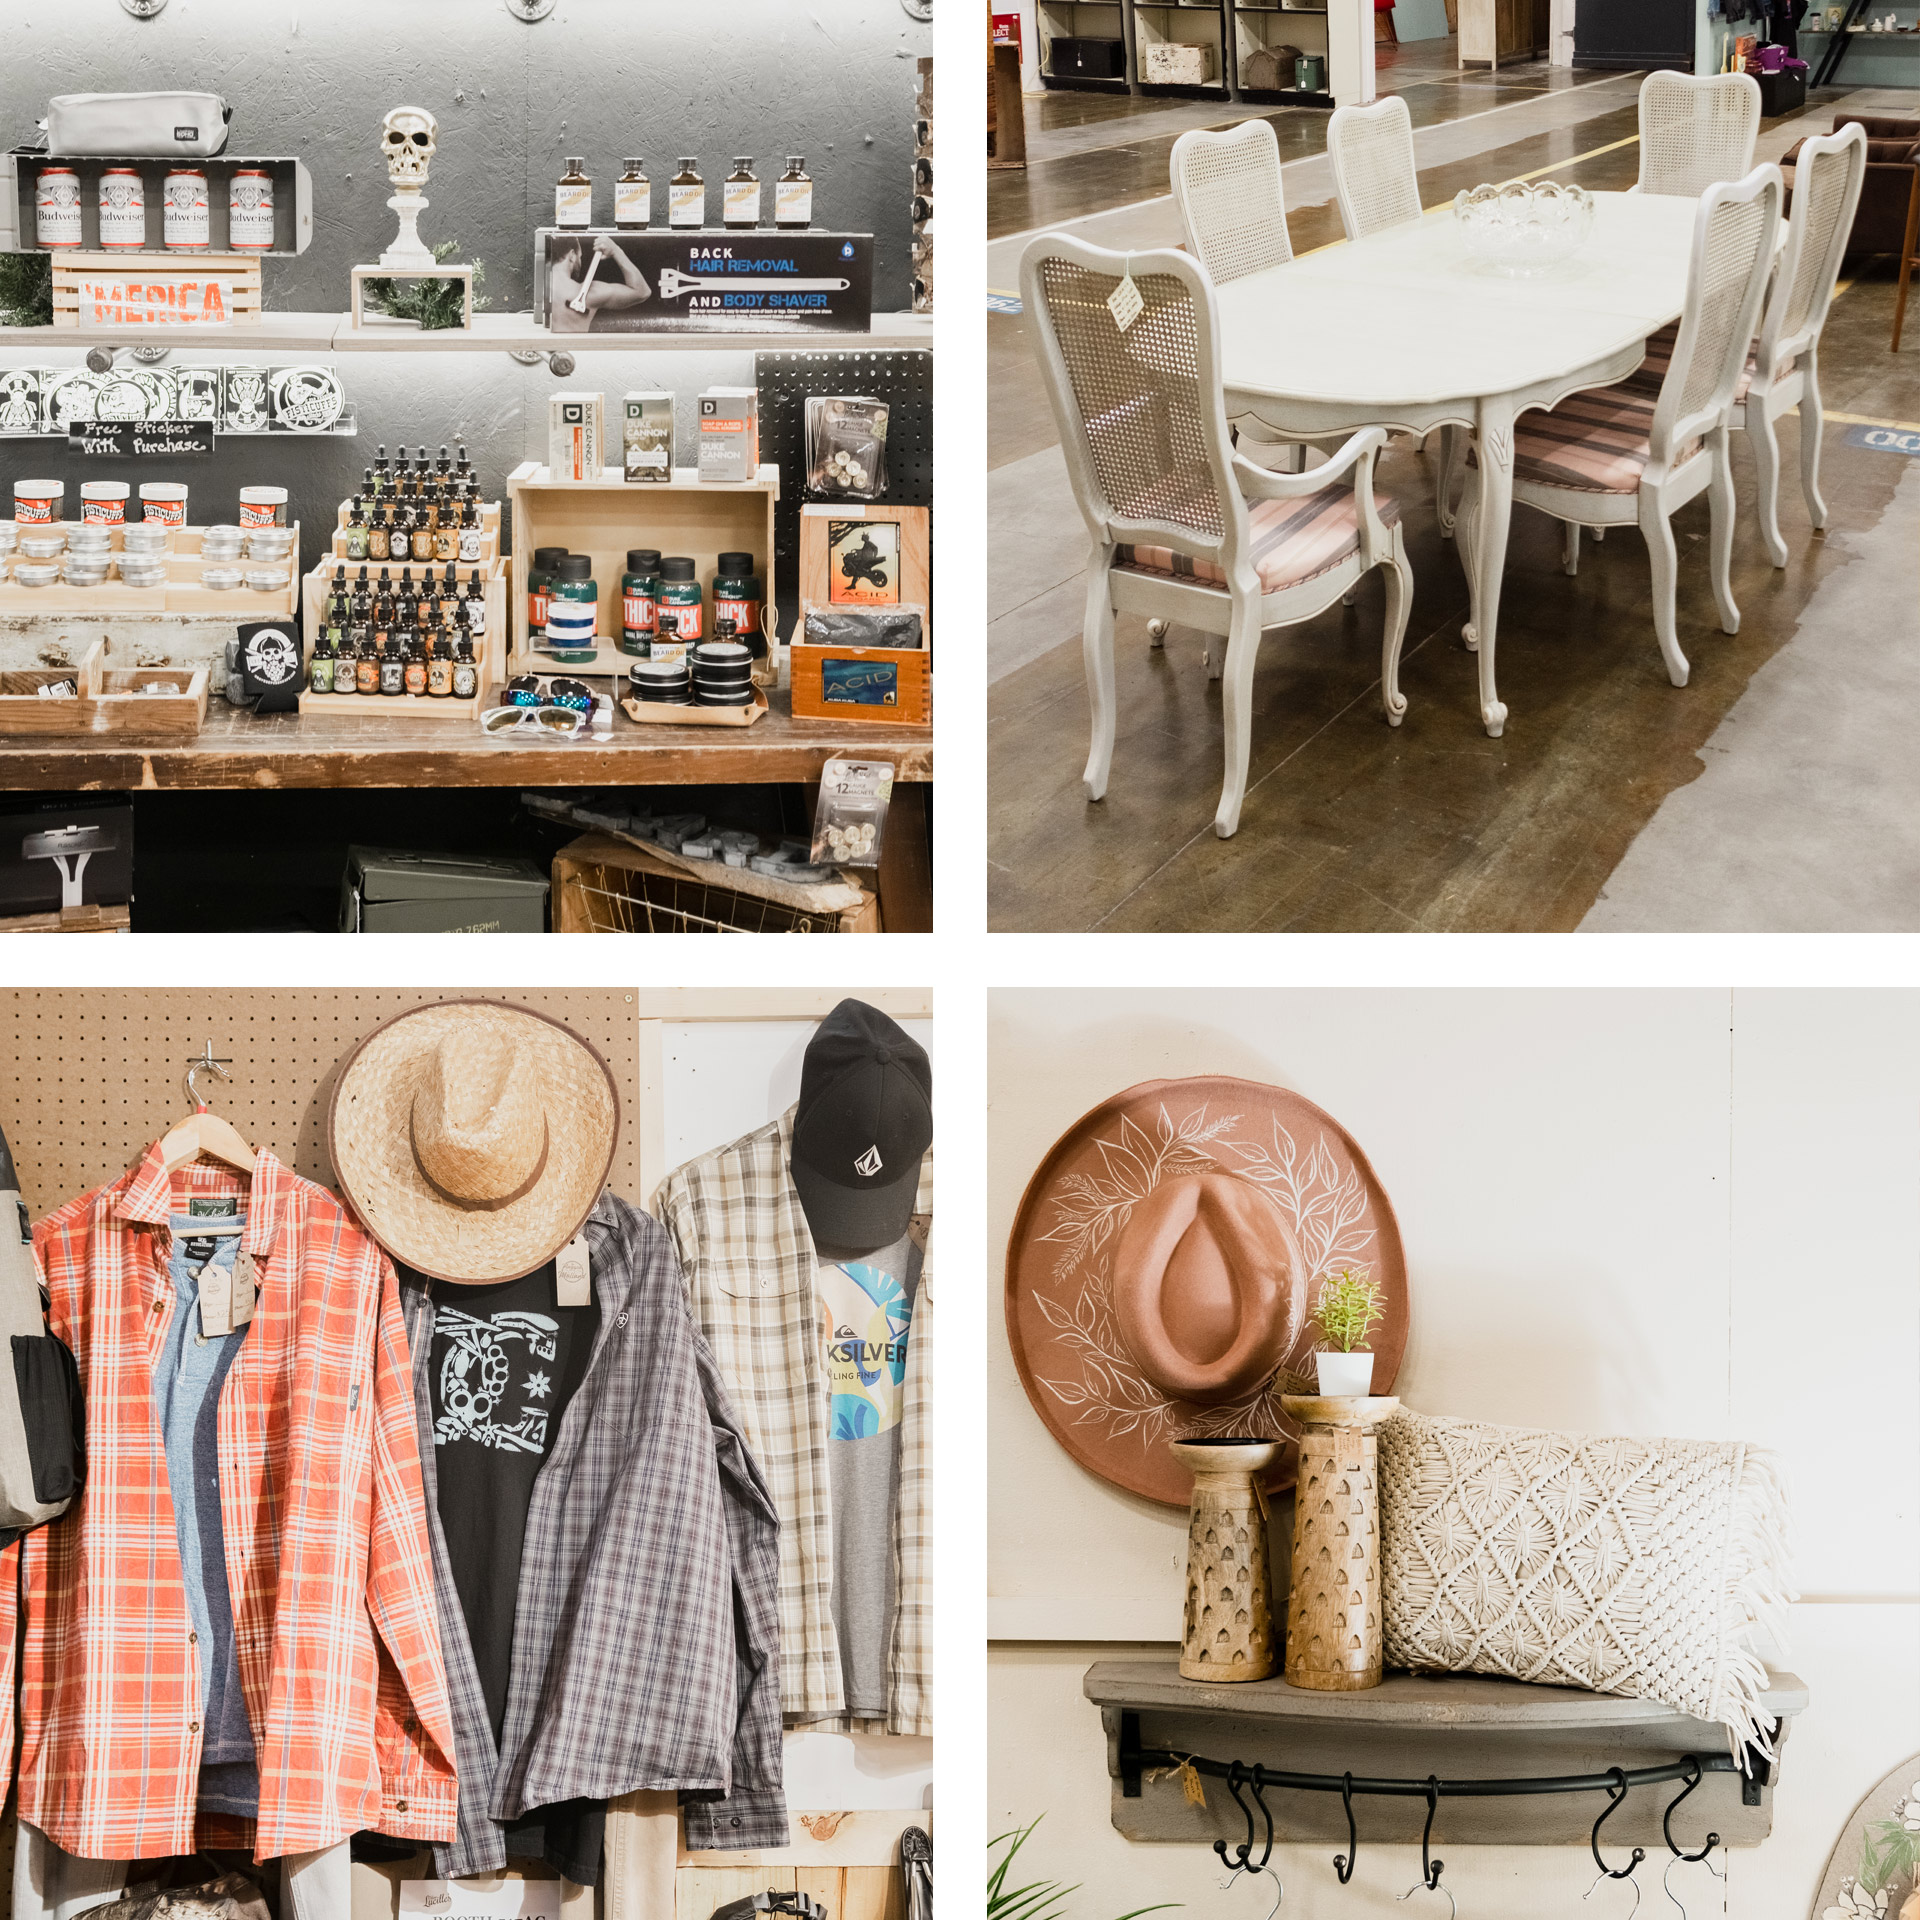 Miss Lucille's Marketplace - Antique Mall & Coffee Shop